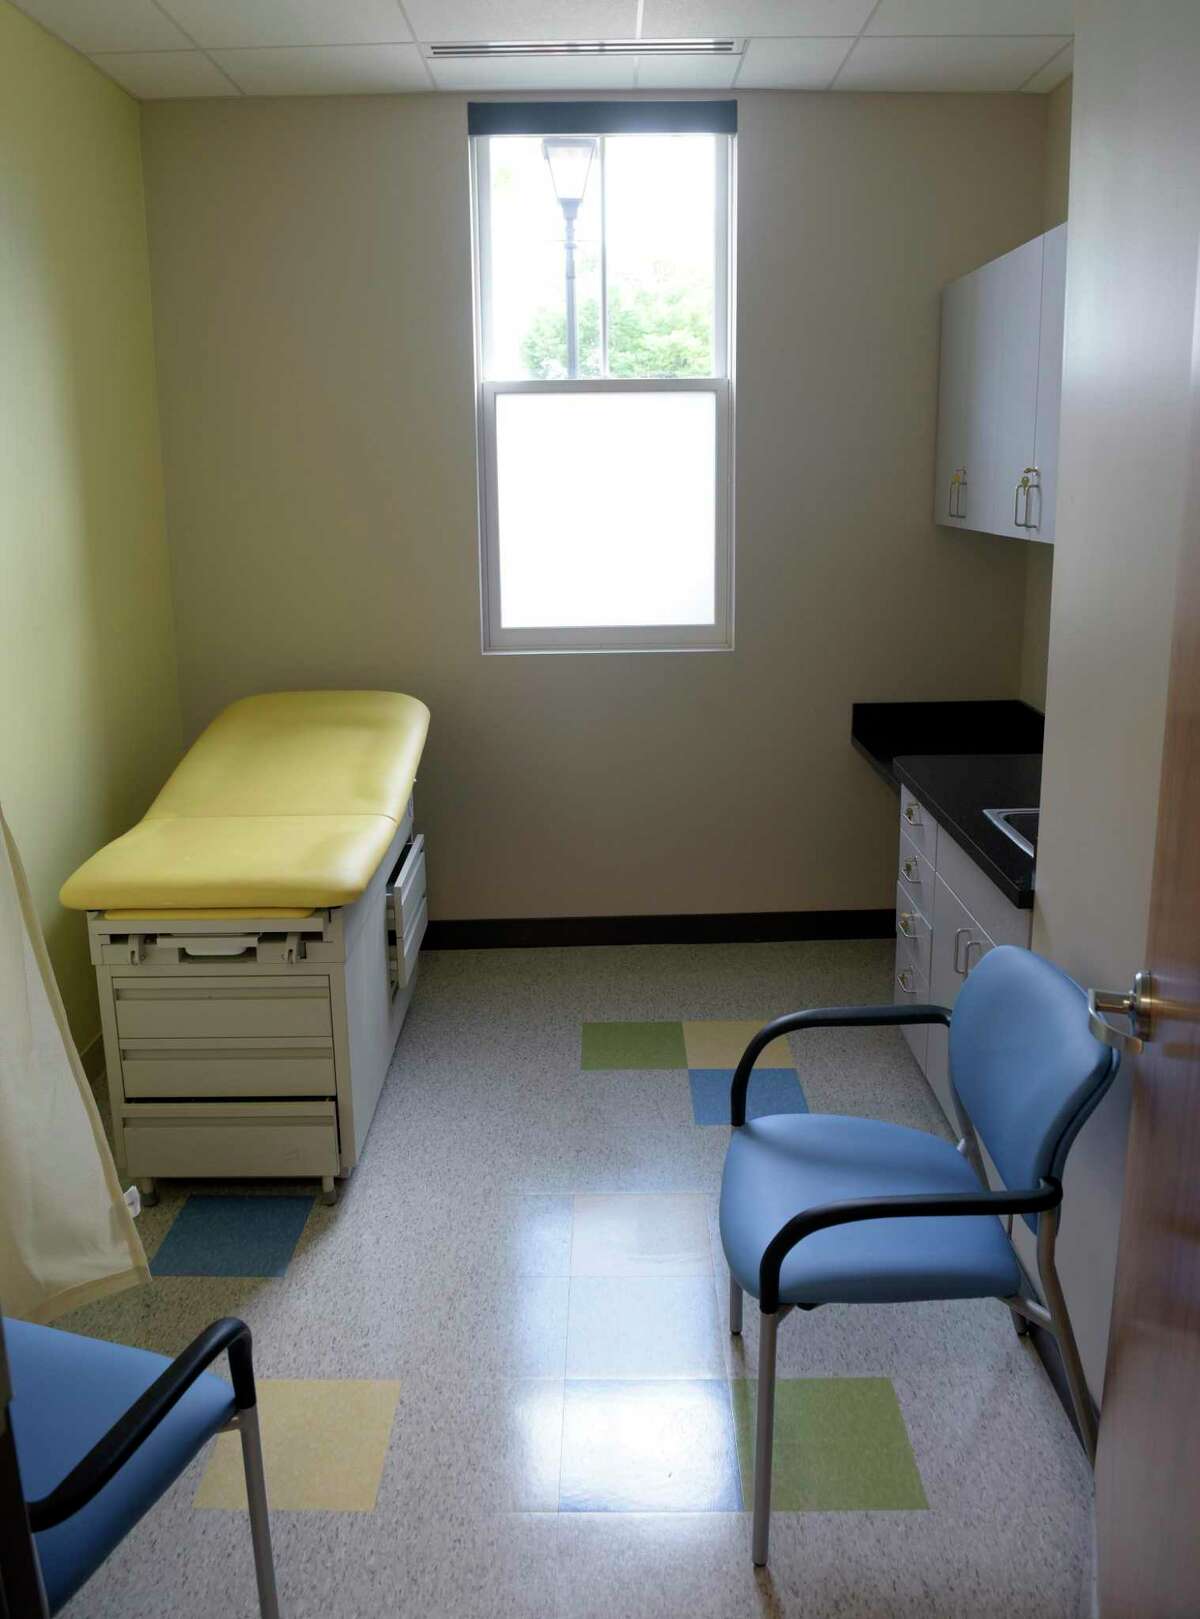 A new exam room in the family medicine suite at the Connecticut Institute for Communities. The CIFC is opening a new 8,500 square-foot wing at 120 Main Street in Danbury. The new wing includes 3 new dental operatories, a new family medicine suite, 8+ additional pediatric and adult medicine exam rooms, and a Primary Care Simulation Laboratory for CIFC’s Teaching Health Center program. Thursday, August 11, 2022, Danbury, Conn.